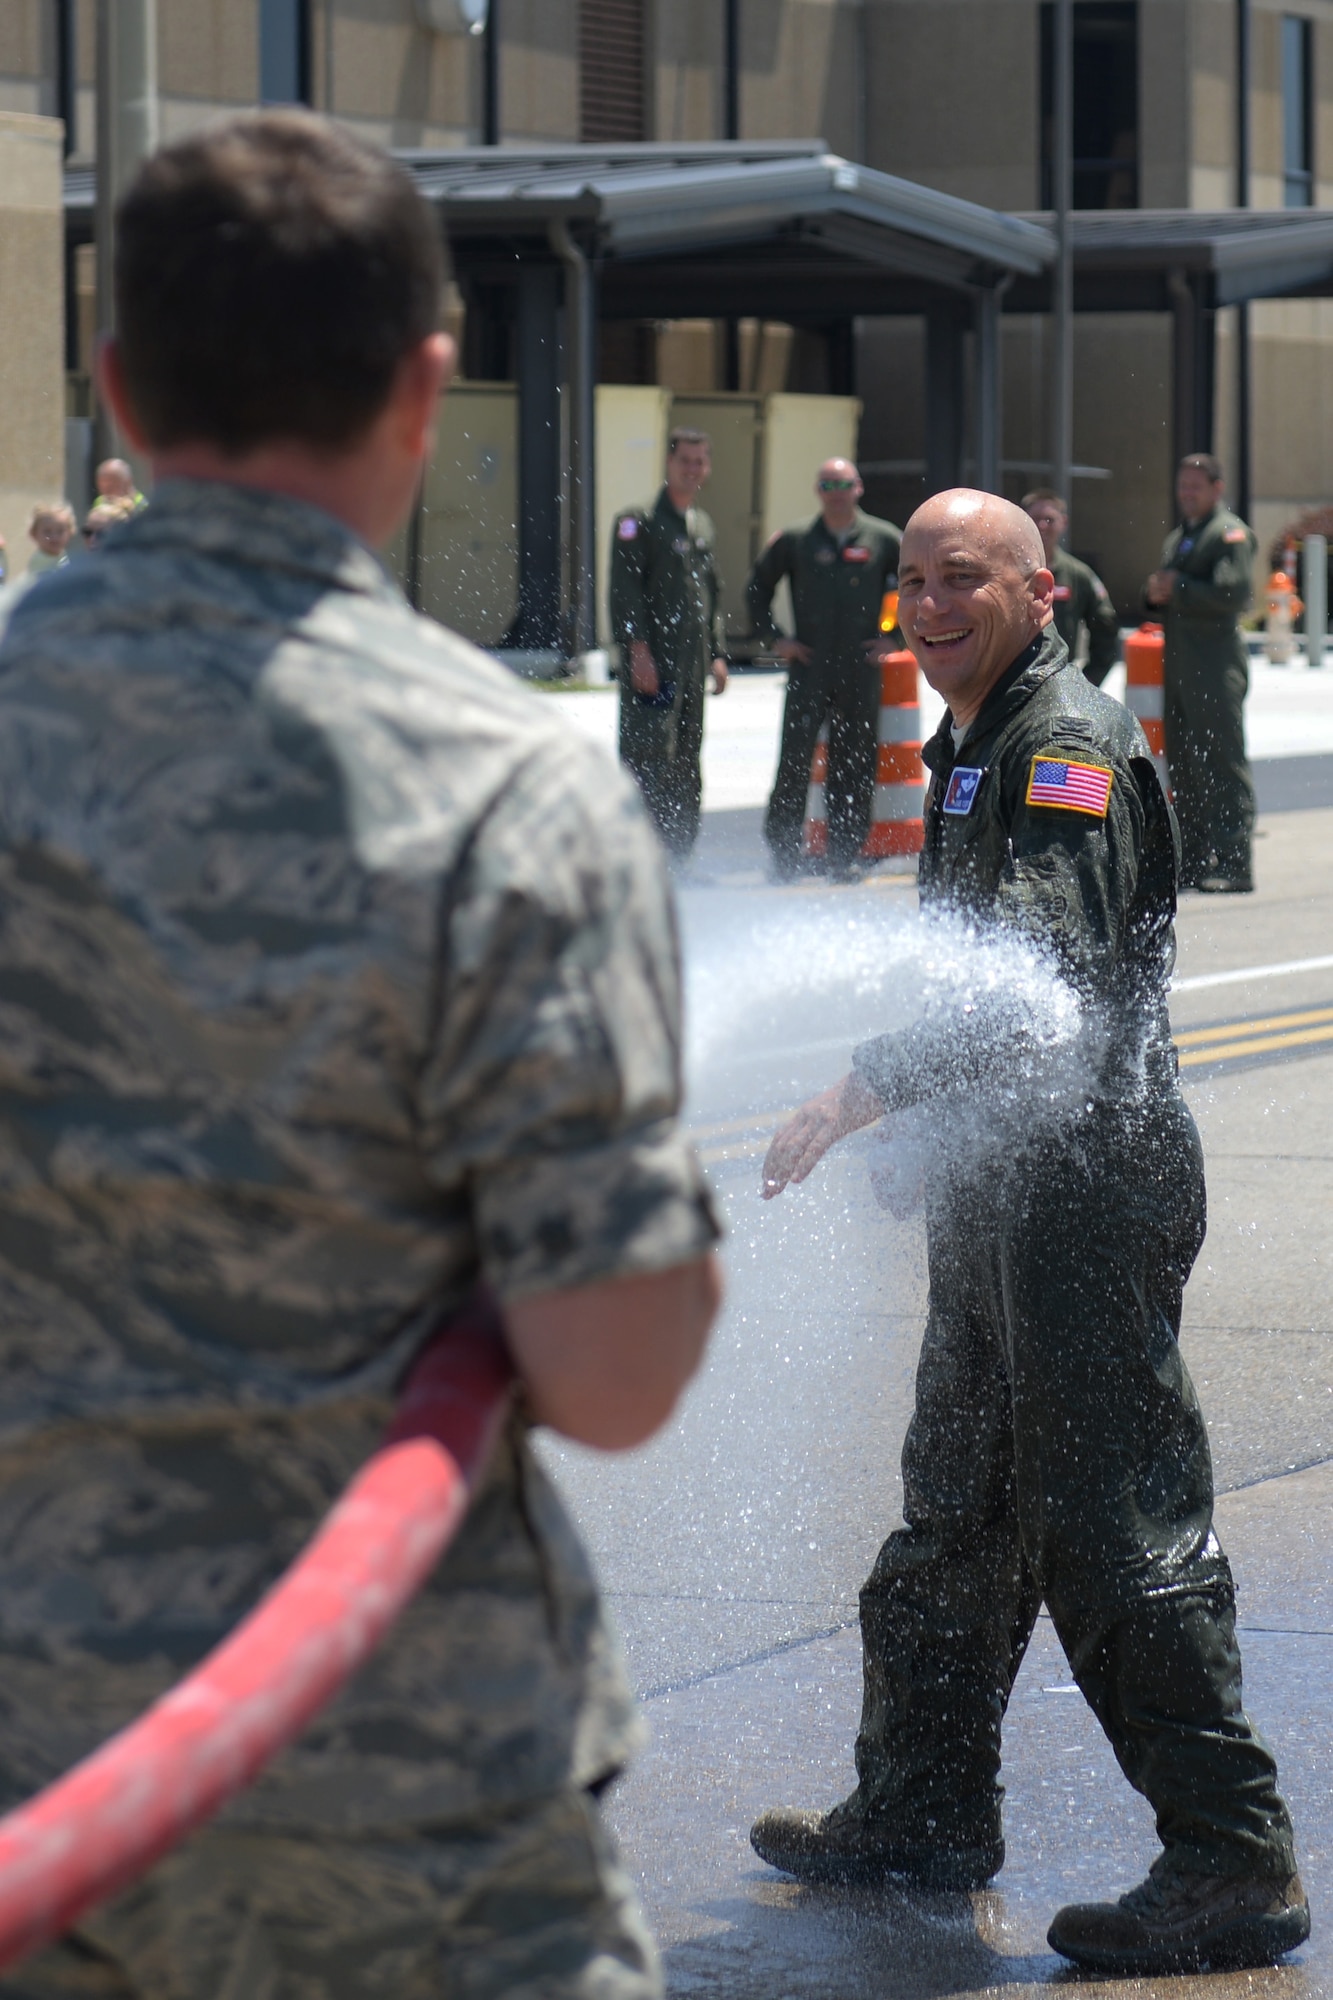 Col. David Condit, 403rd Operation Group commander, is sprayed by Maj. Kevin Myers, 403rd OG executive officer, in celebration of his final flight with the 403rd Wing May 5, 2016, Keesler Air Force Base, Mississippi. Condit has been assigned to the 403rd Wing since July 2013 and has more than 4,000 flight hours throughout his career in the Air Force. His last day with the 403rd Wing is May 15, 2016. His next assignment is as the 908th Airlift Wing commander at Maxwell Air Force Base, Alabama. (Air Force photo/Airman 1st Class Travis Beihl)
